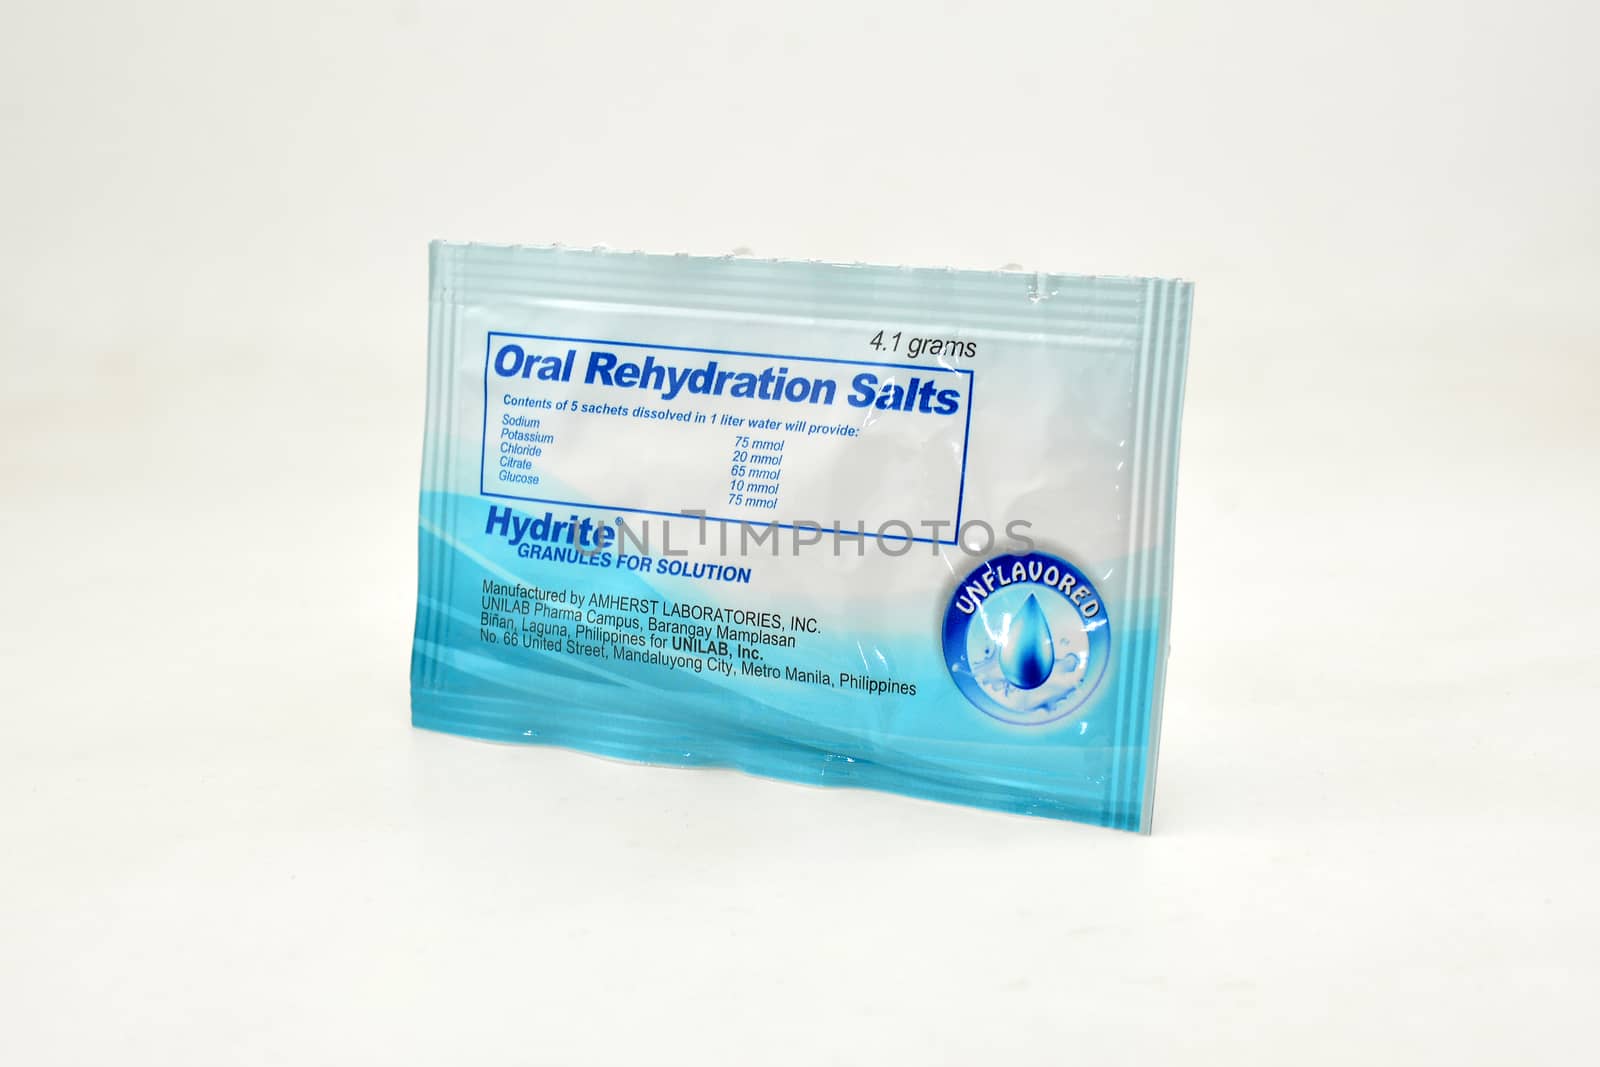 MANILA, PH - SEPT 10 - Oral rehydration salts hydrite on September 10, 2020 in Manila, Philippines.